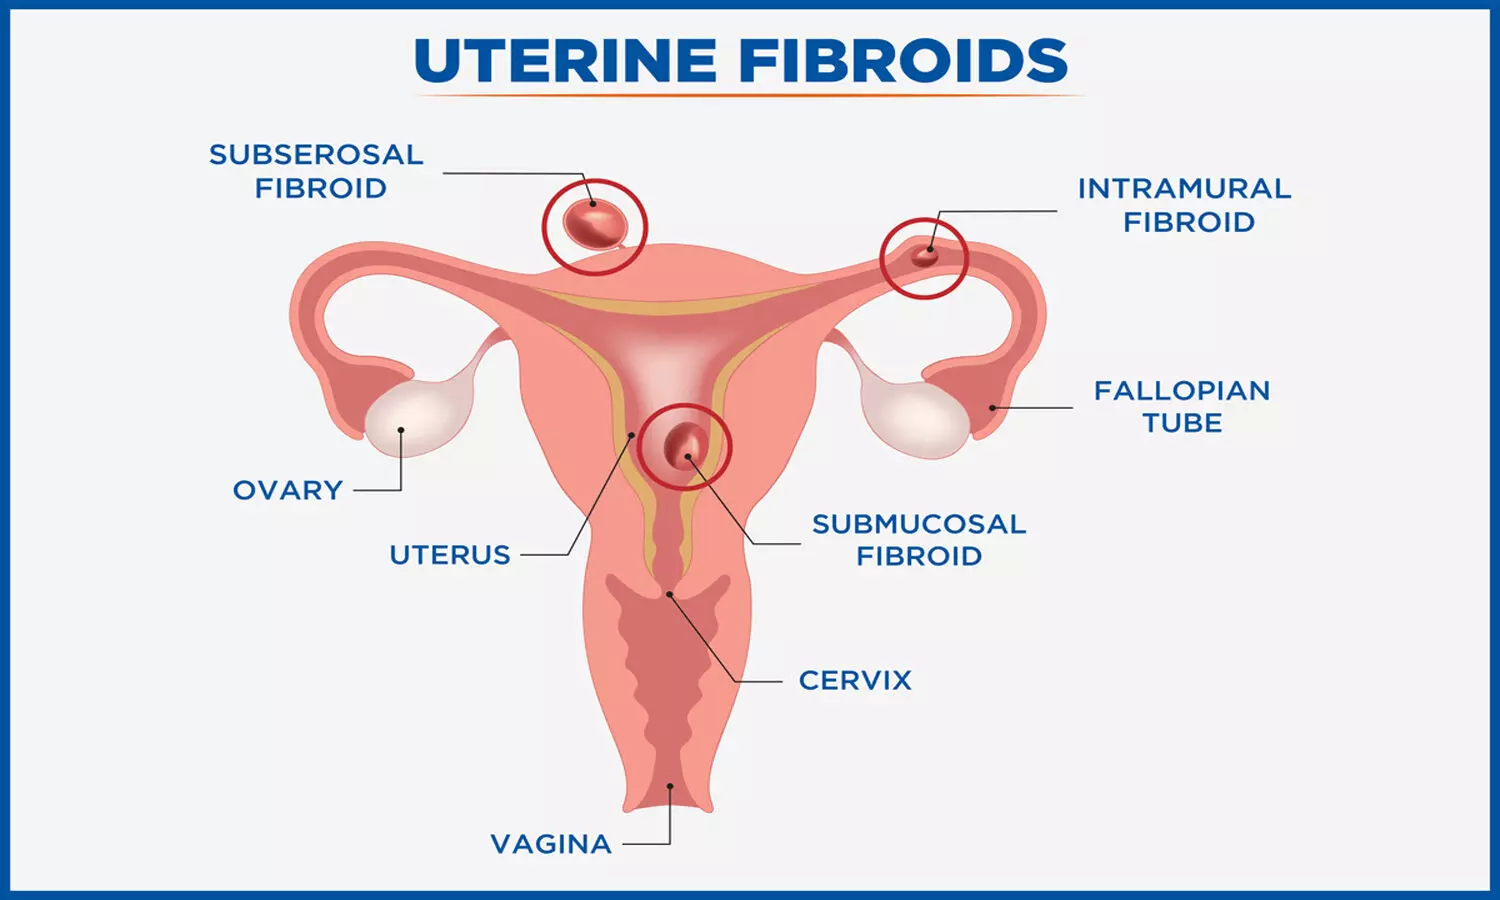 Relugolix combo significantly reduces menstrual bleeding in uterine fibroids patients: NEJM